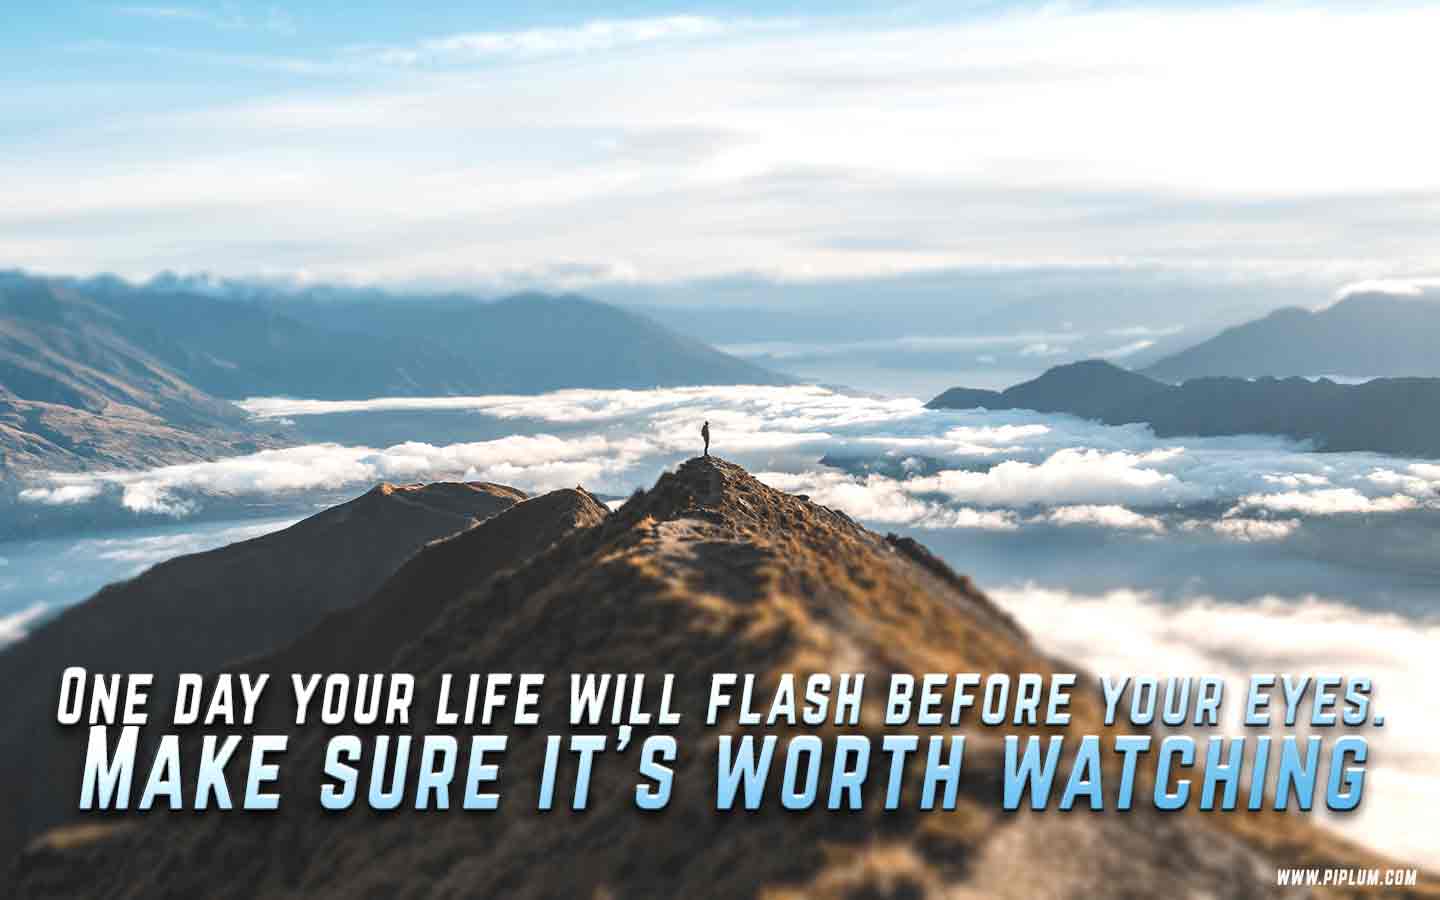 Make-some-changes-in-your-life-if-you-want-it-to-be-worth-watching-quote